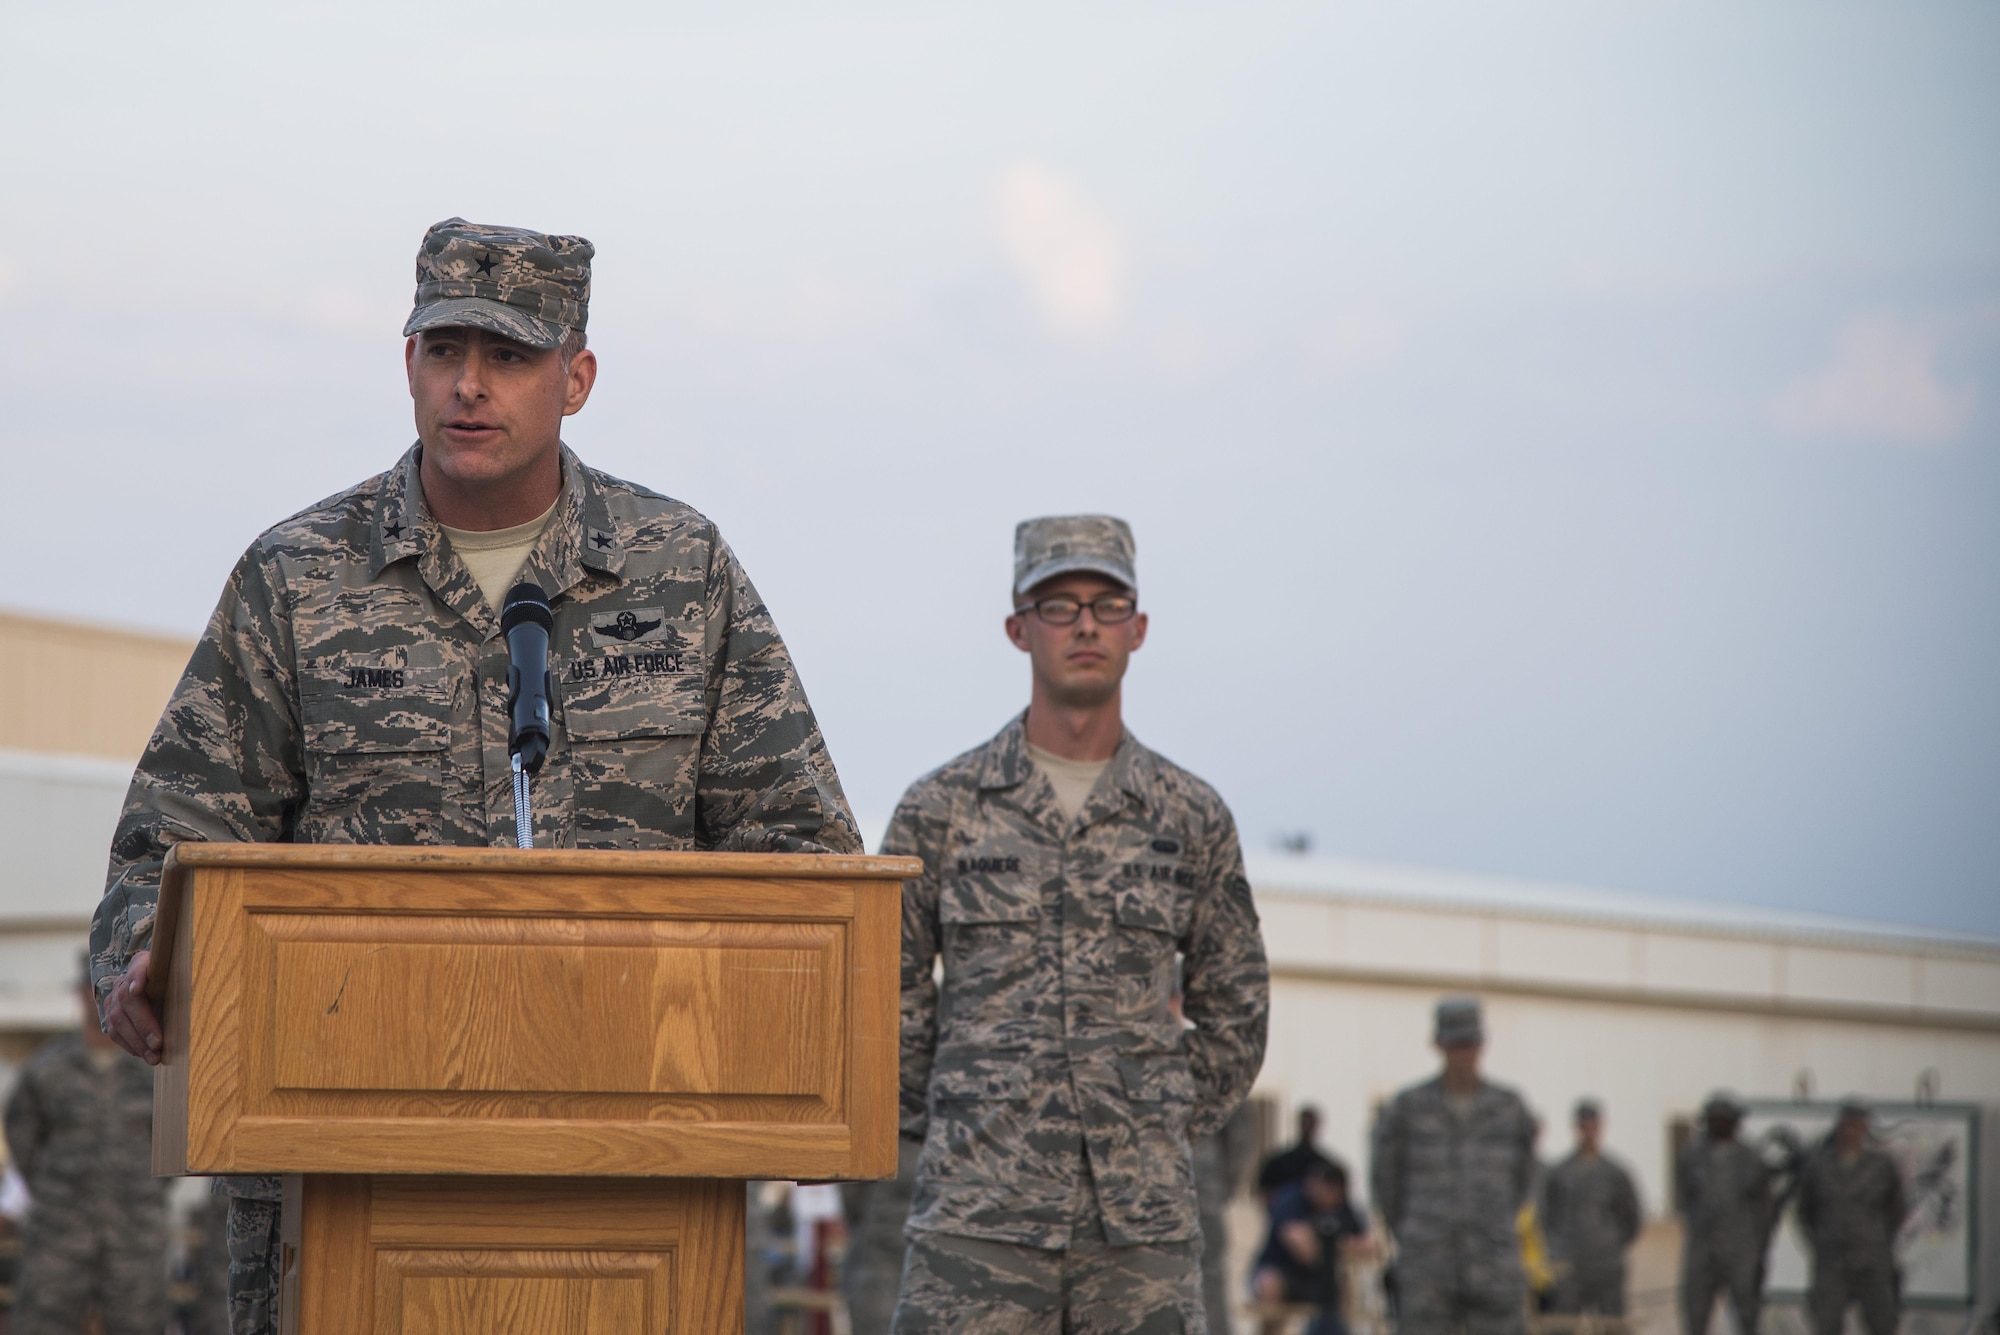 Brig. Gen. Darren James, 379th Air Expeditionary Wing commander, speaks to Airmen and coalition forces at the beginning of a retreat ceremony recognizing the fourteenth anniversary of Sept. 11, 2001, at Al Udeid Air Base, Qatar, Sept. 11, 2015. The retreat ceremony signals the end of the official duty day and serves as a ceremony for paying respect to the flag. In this ceremony, respect was paid to the flag and the memory of those lost on Sept. 11, 2001. (U.S. Air Force photo/Tech. Sgt. Rasheen Douglas) 